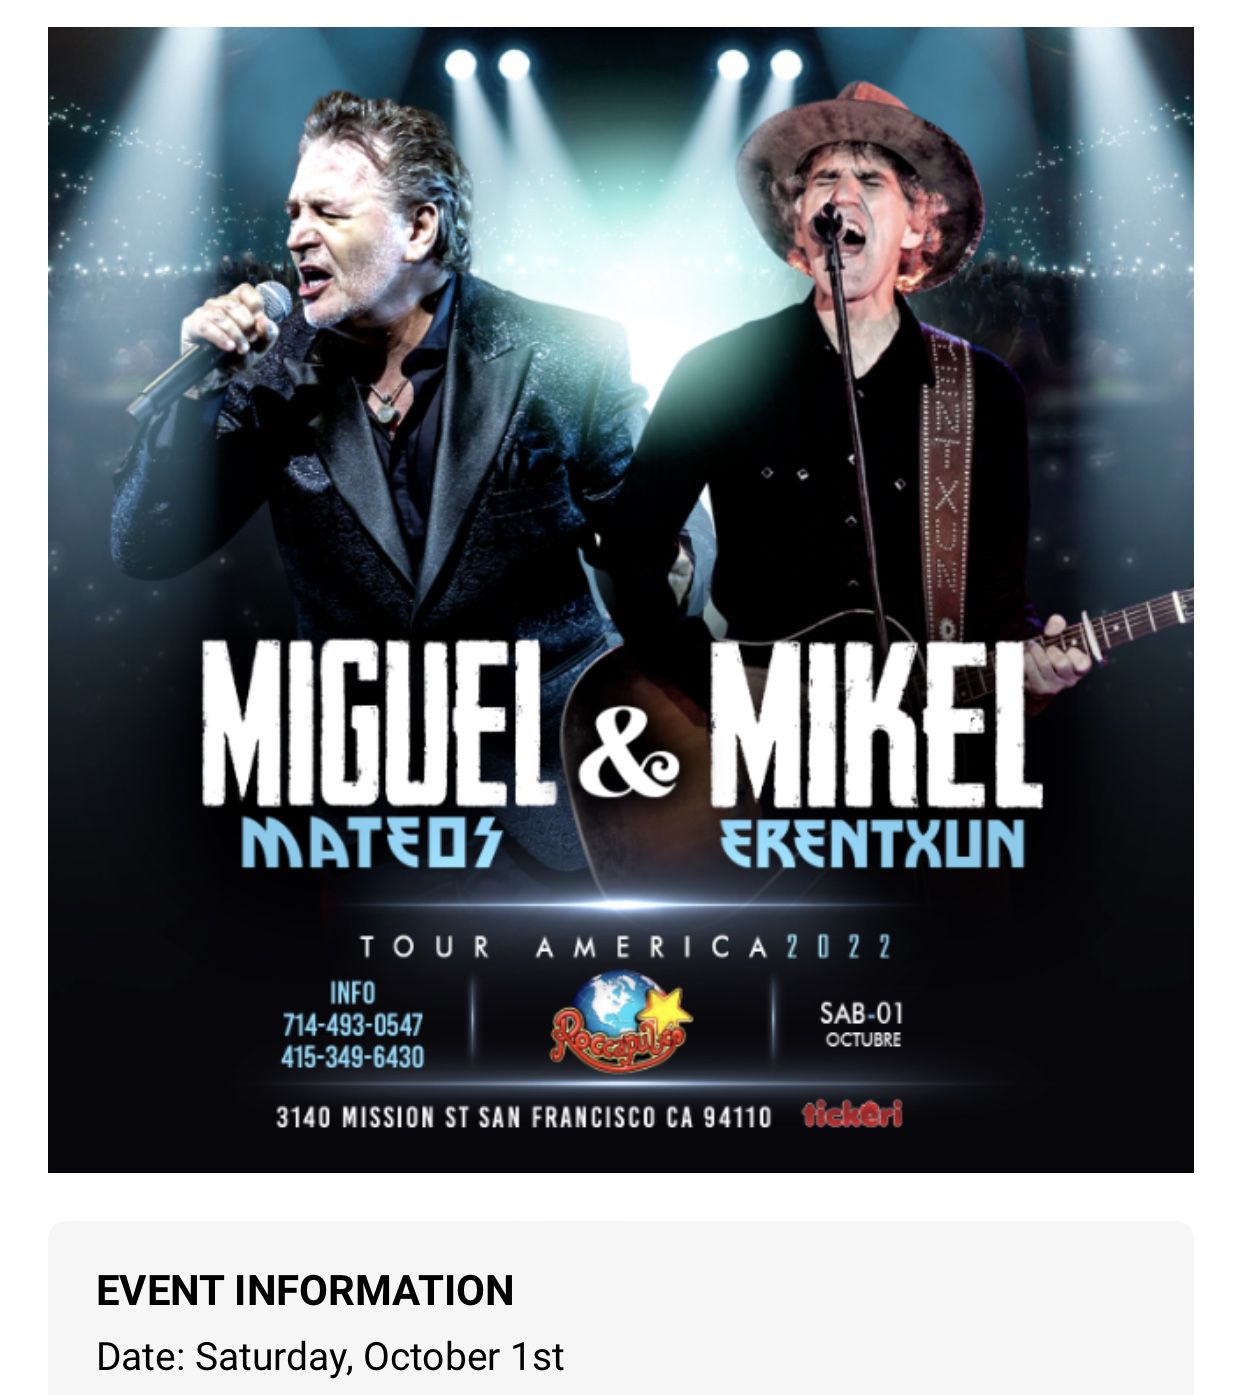 3 Tickets For Miguel Mateos & Mikel Concert For $40.